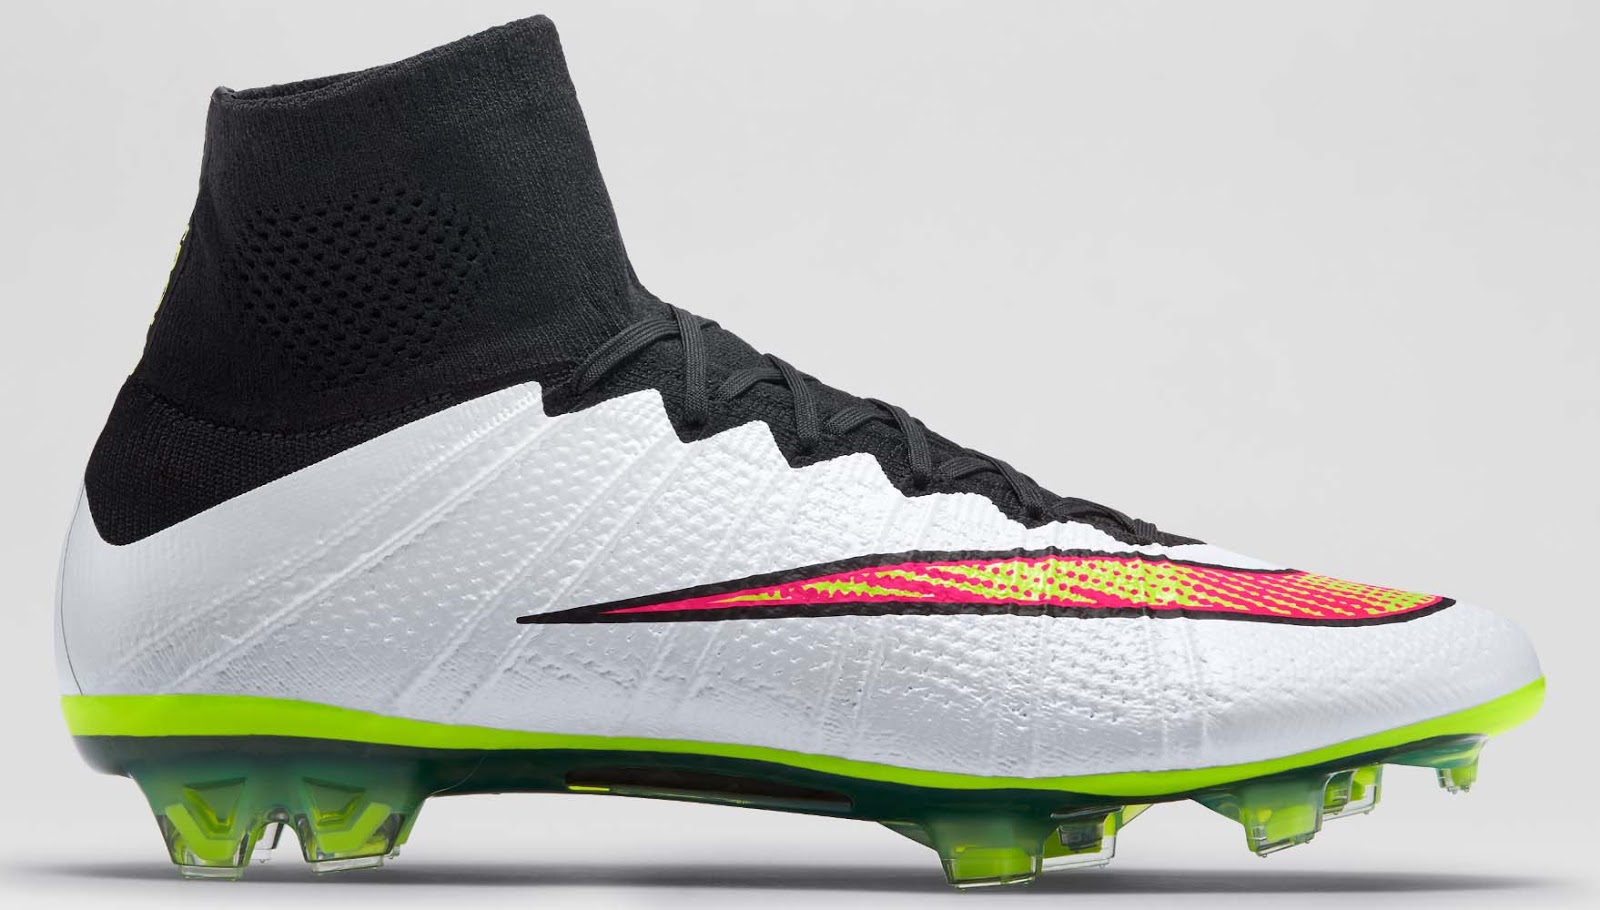 White Nike Mercurial Superfly Boot Released - Footy